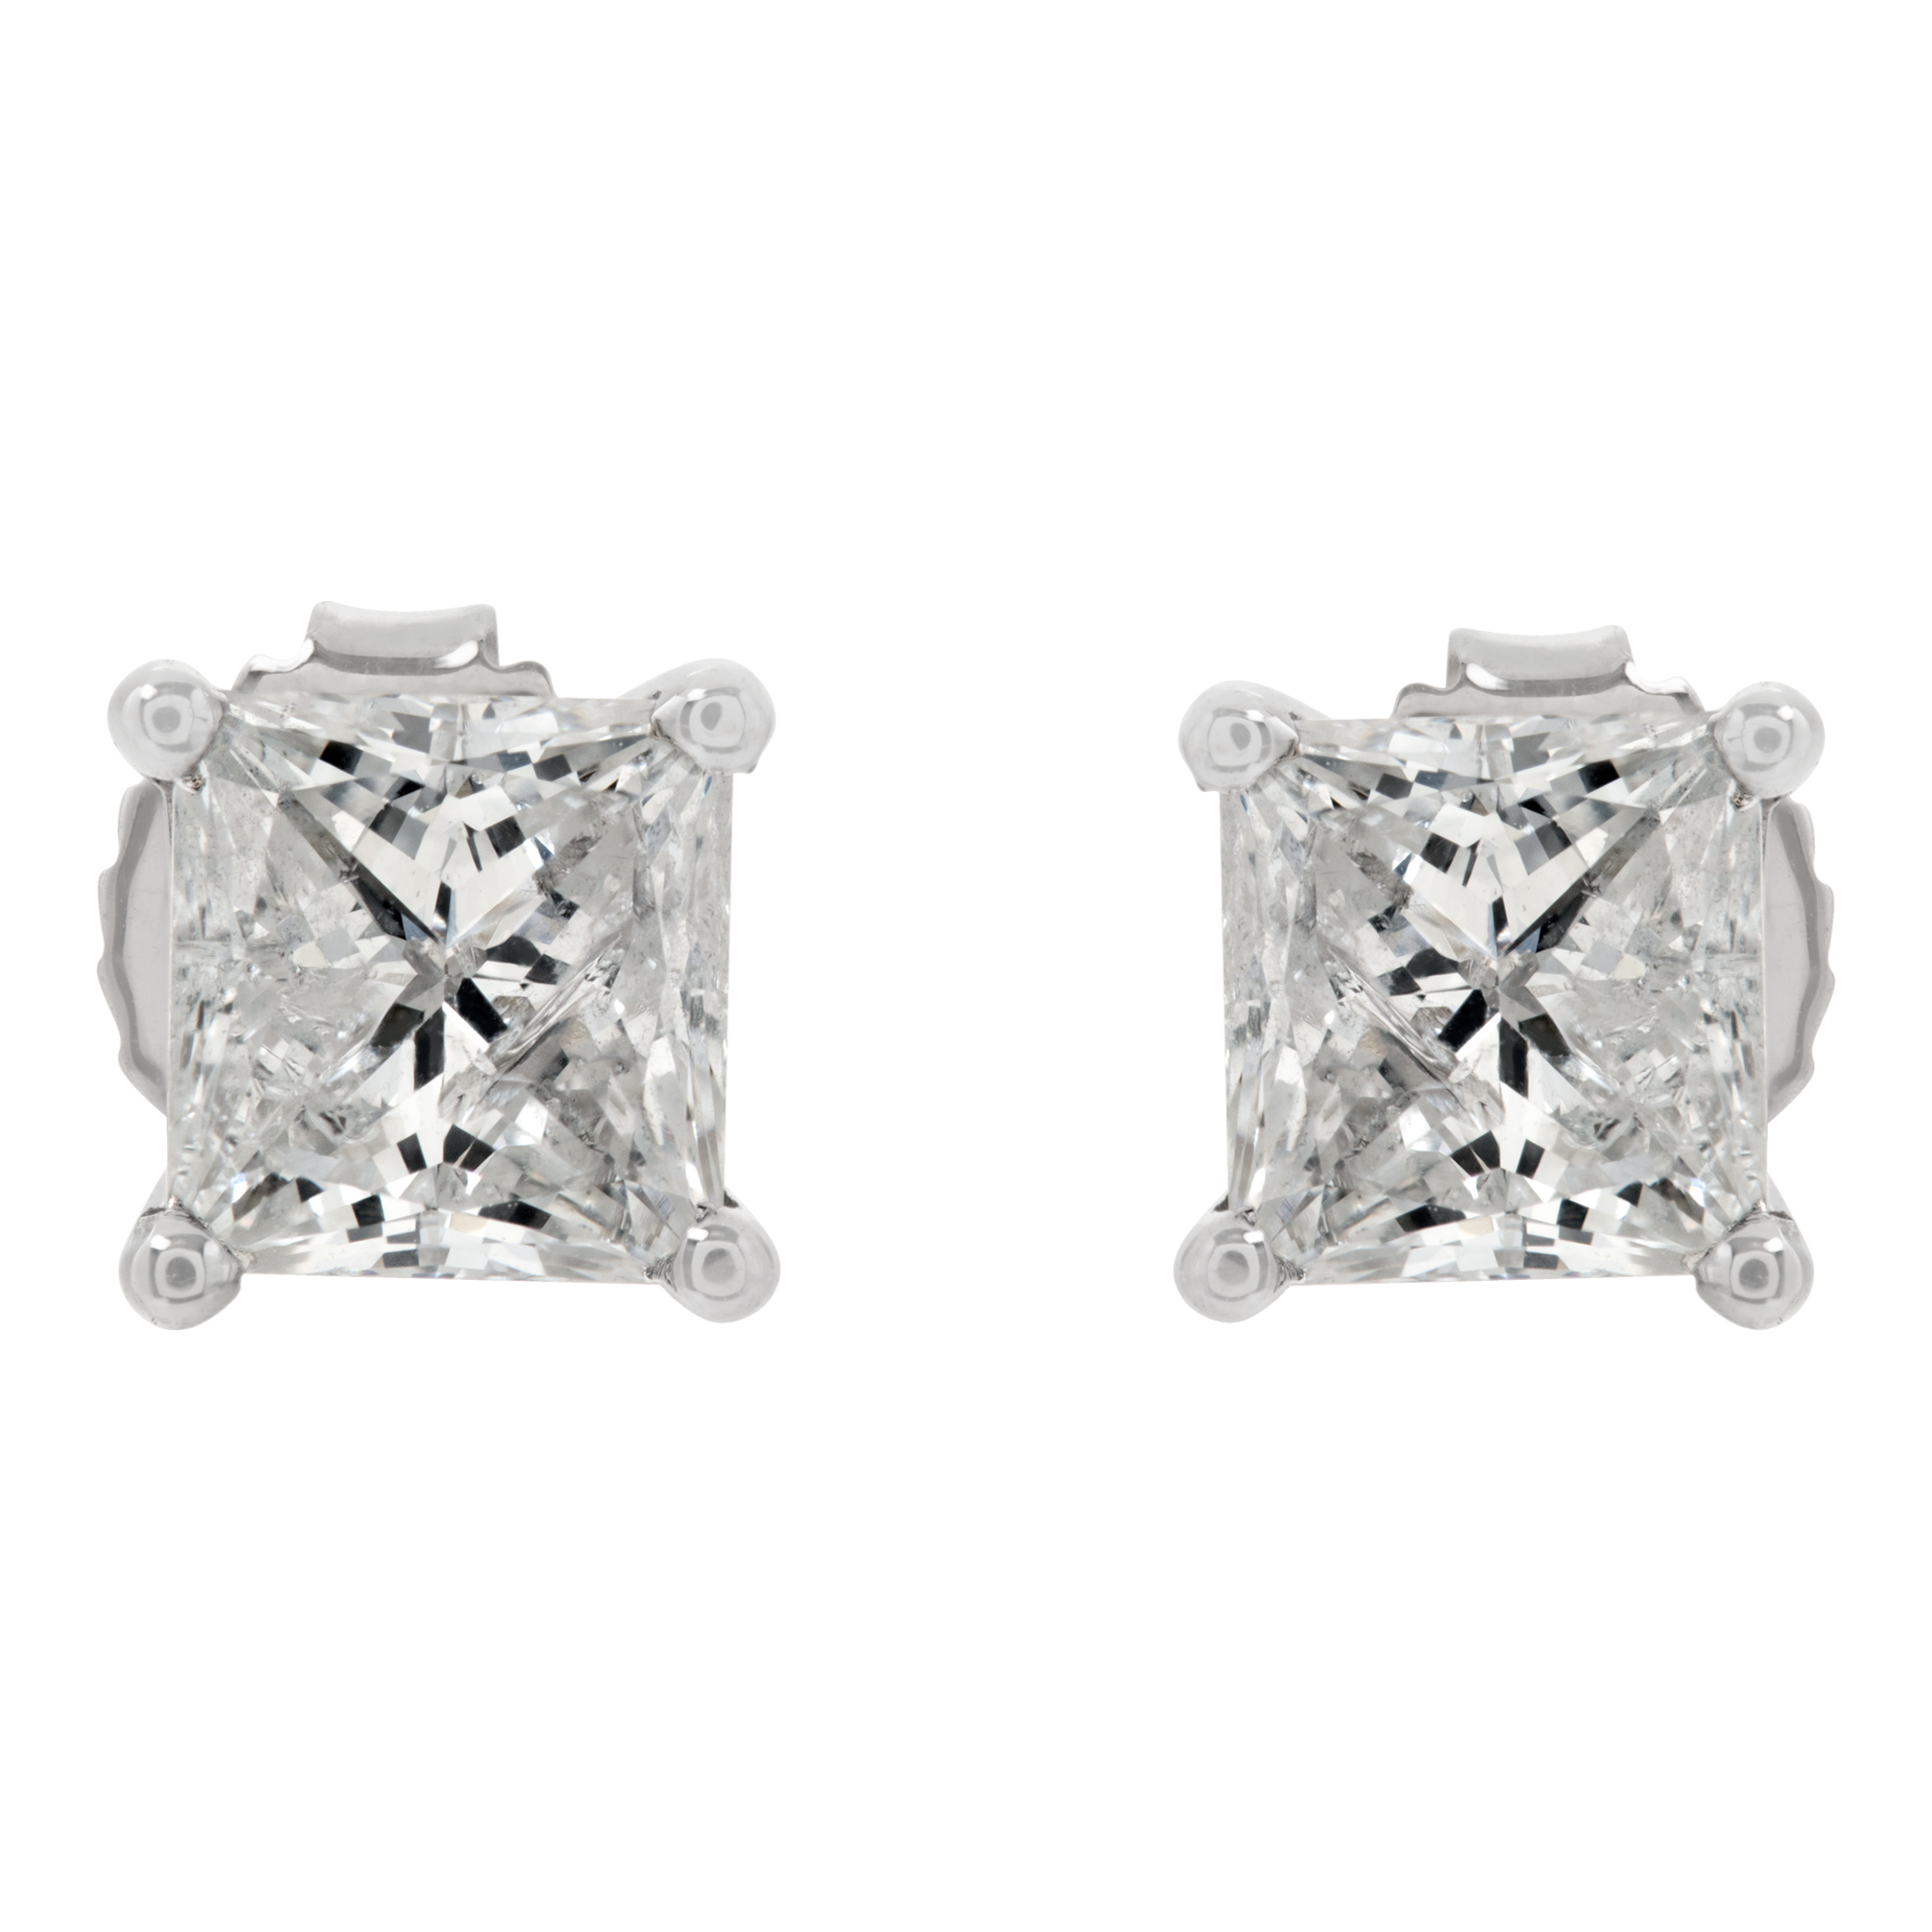 Princess cut diamond studs in 14k white gold with 2.54 cts in H-I Color, I2 Clarity Diamonds (Stones)